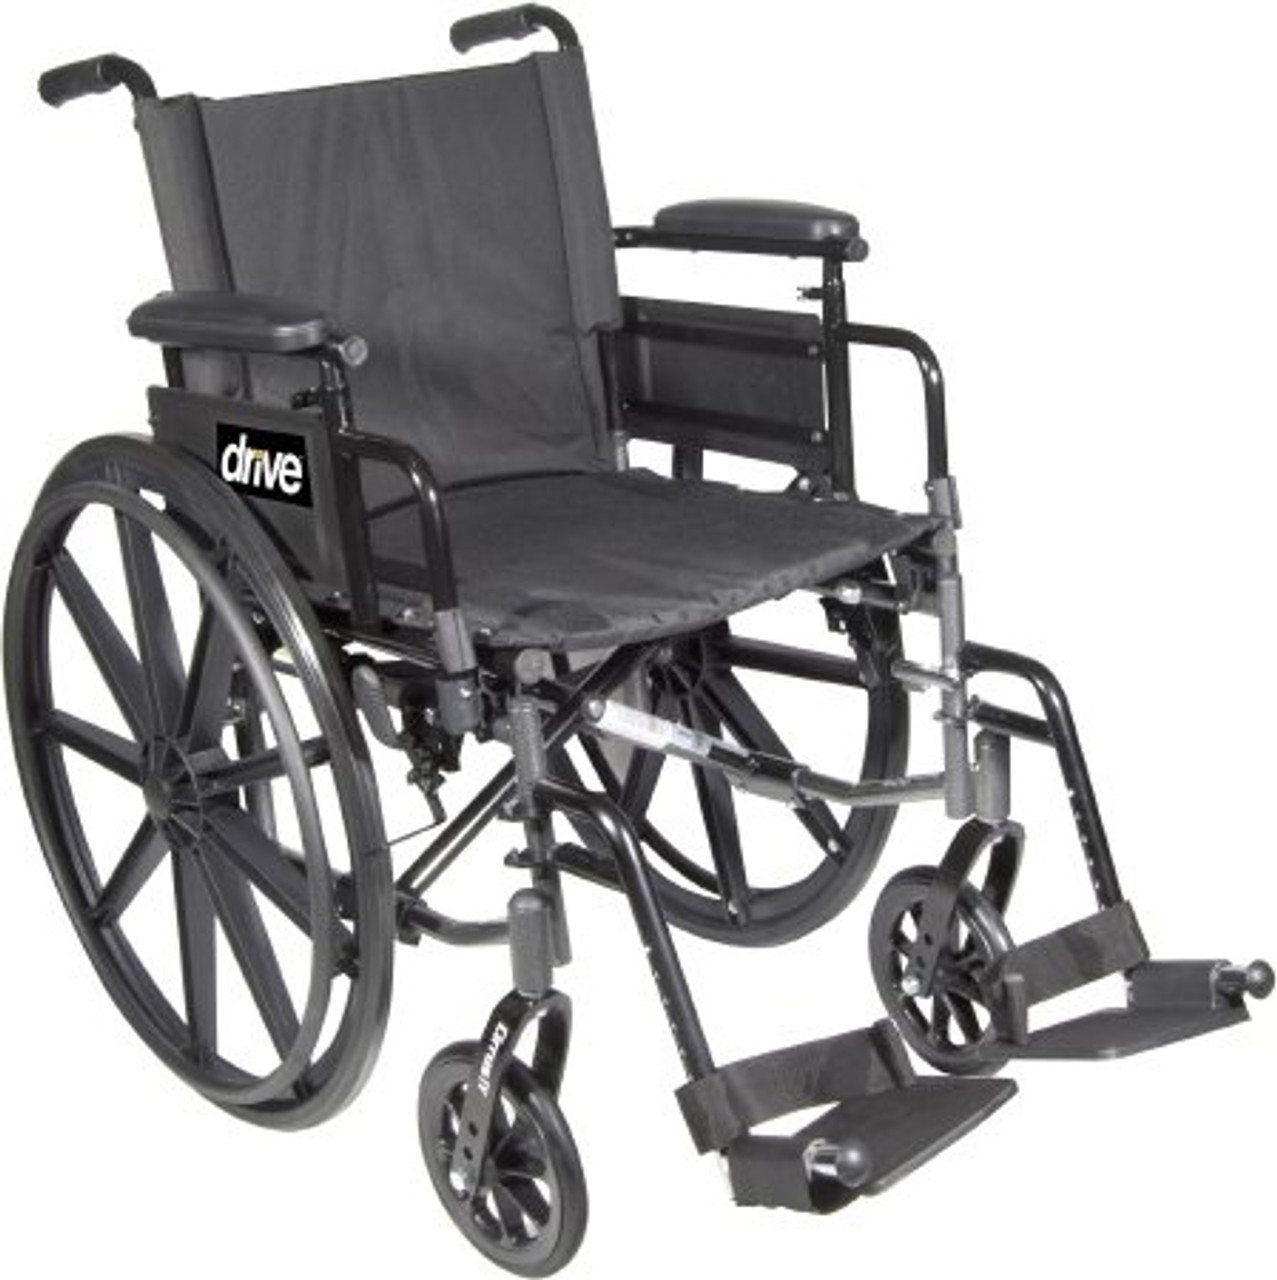 Drive C418ADFASV-SF Cirrus IV Lightweight Dual Axle Wheelchair with Adjustable Arms, Detachable Full Arms, Swing Away Footrests, 18" Seat (C418ADFASV-SF)